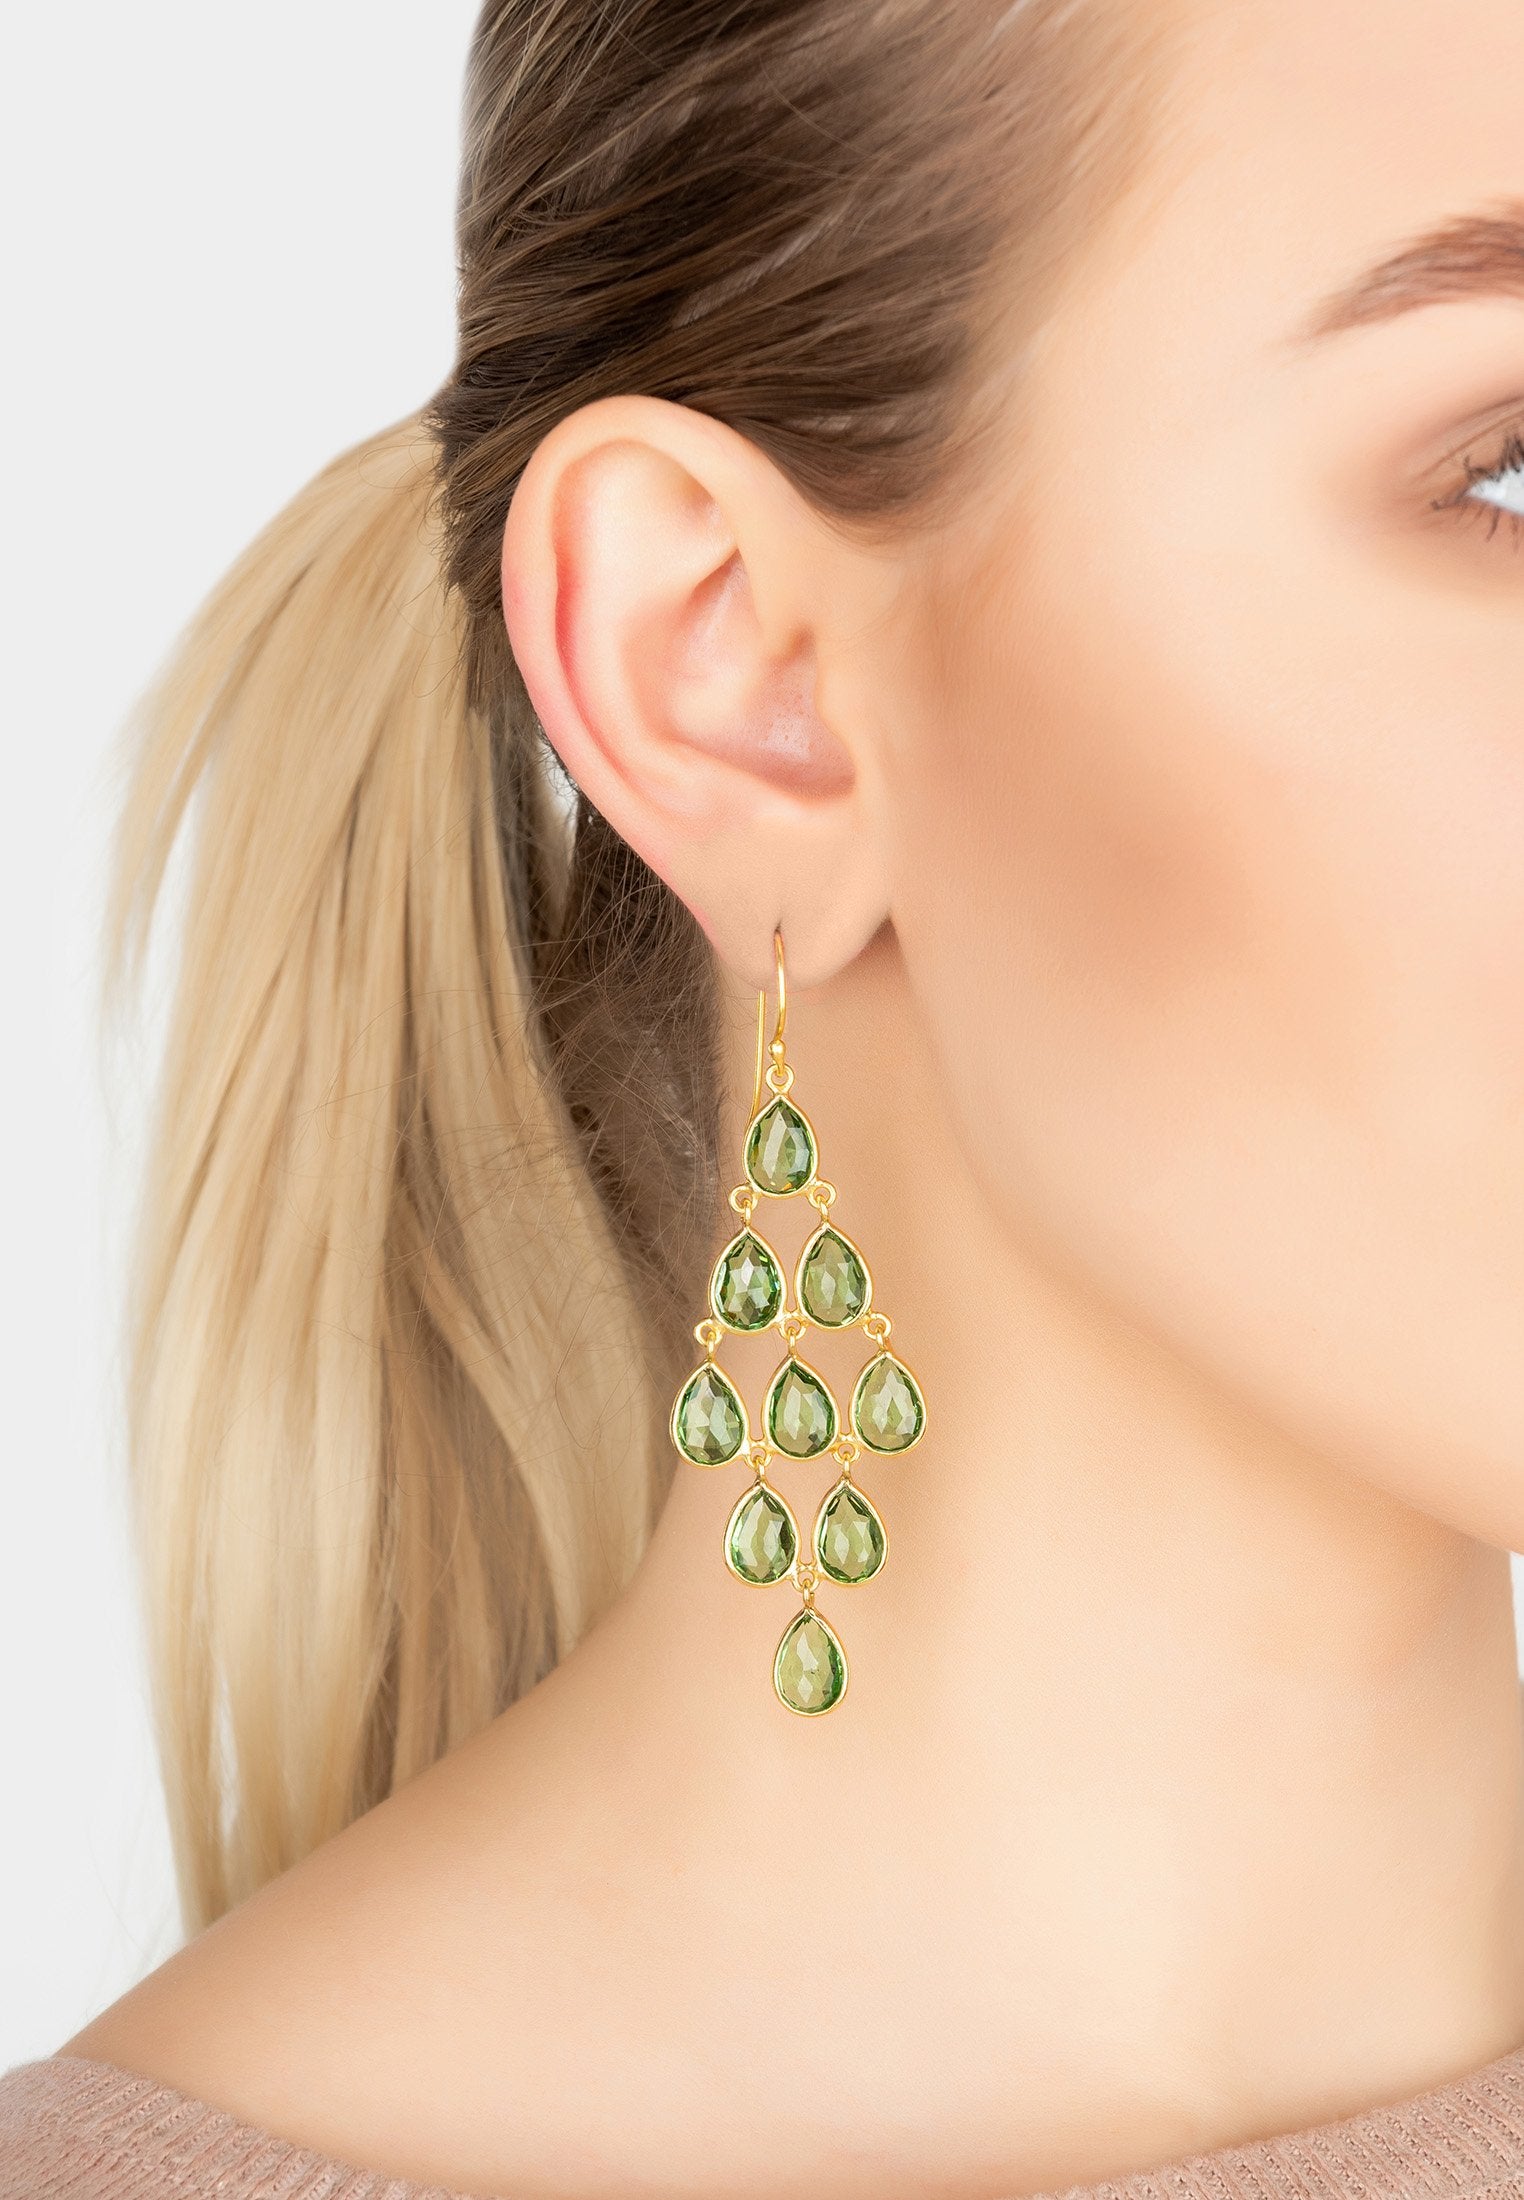 Peridot Gemstone Cascade Drop Earrings in Gold - Statement Jewelry for All Occasions - Jewelry & Watches - Bijou Her -  -  - 